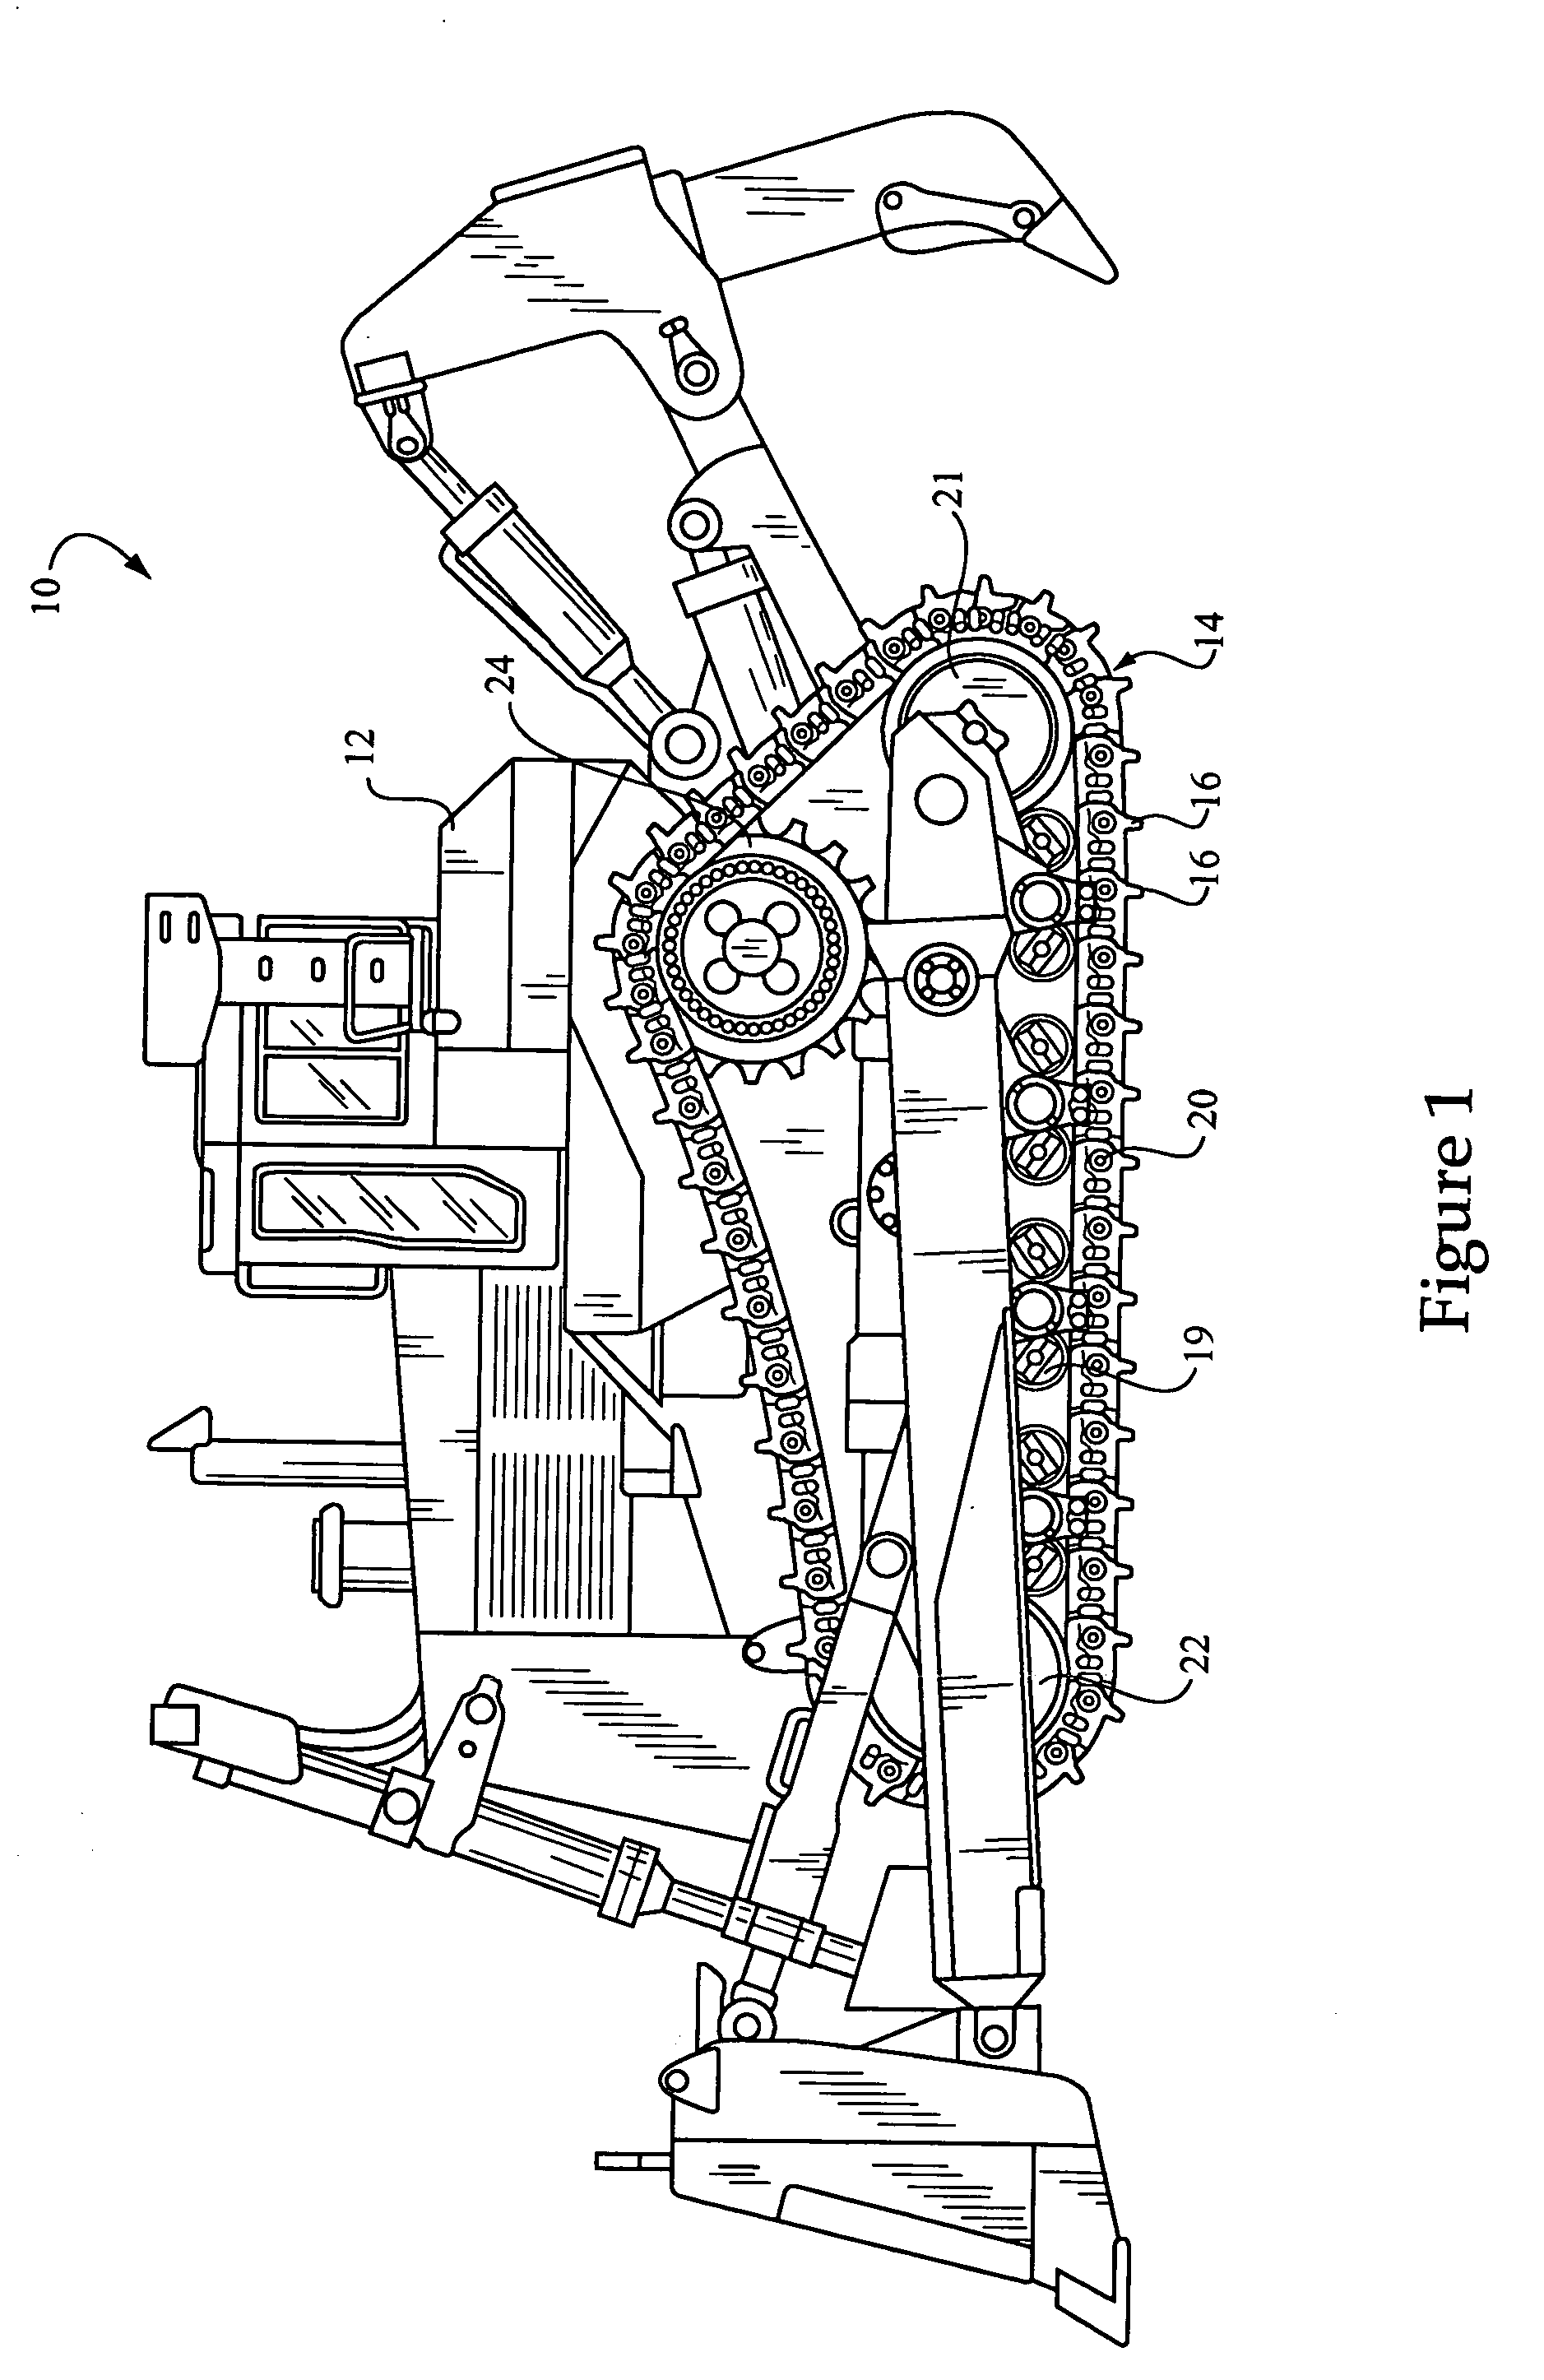 Machine component configuration for enhanced press fit and press fit coupling method